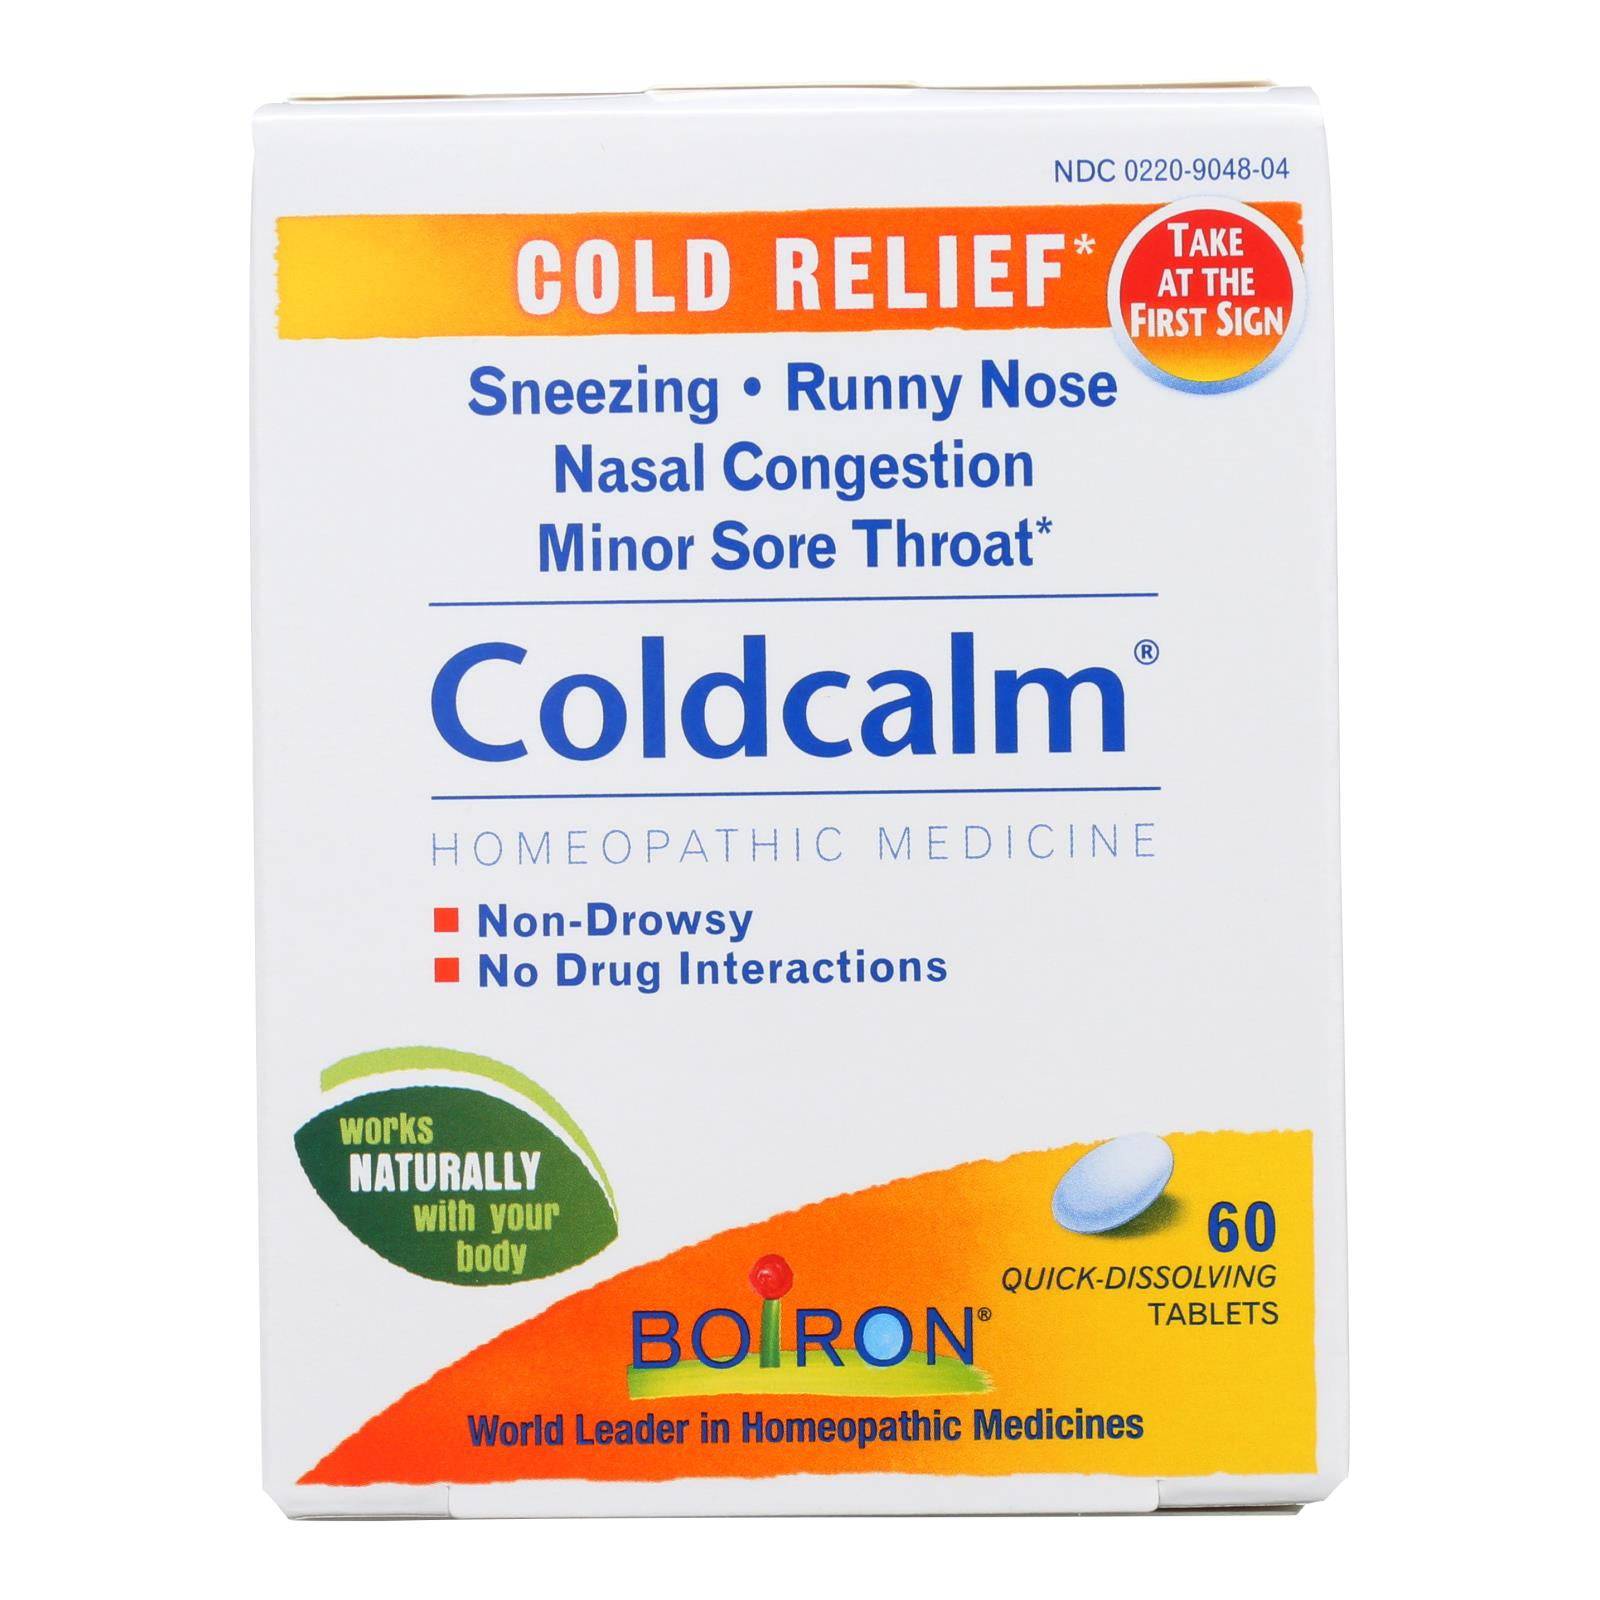 Buy Boiron - Coldcalm Cold - 60 Tablets  at OnlyNaturals.us